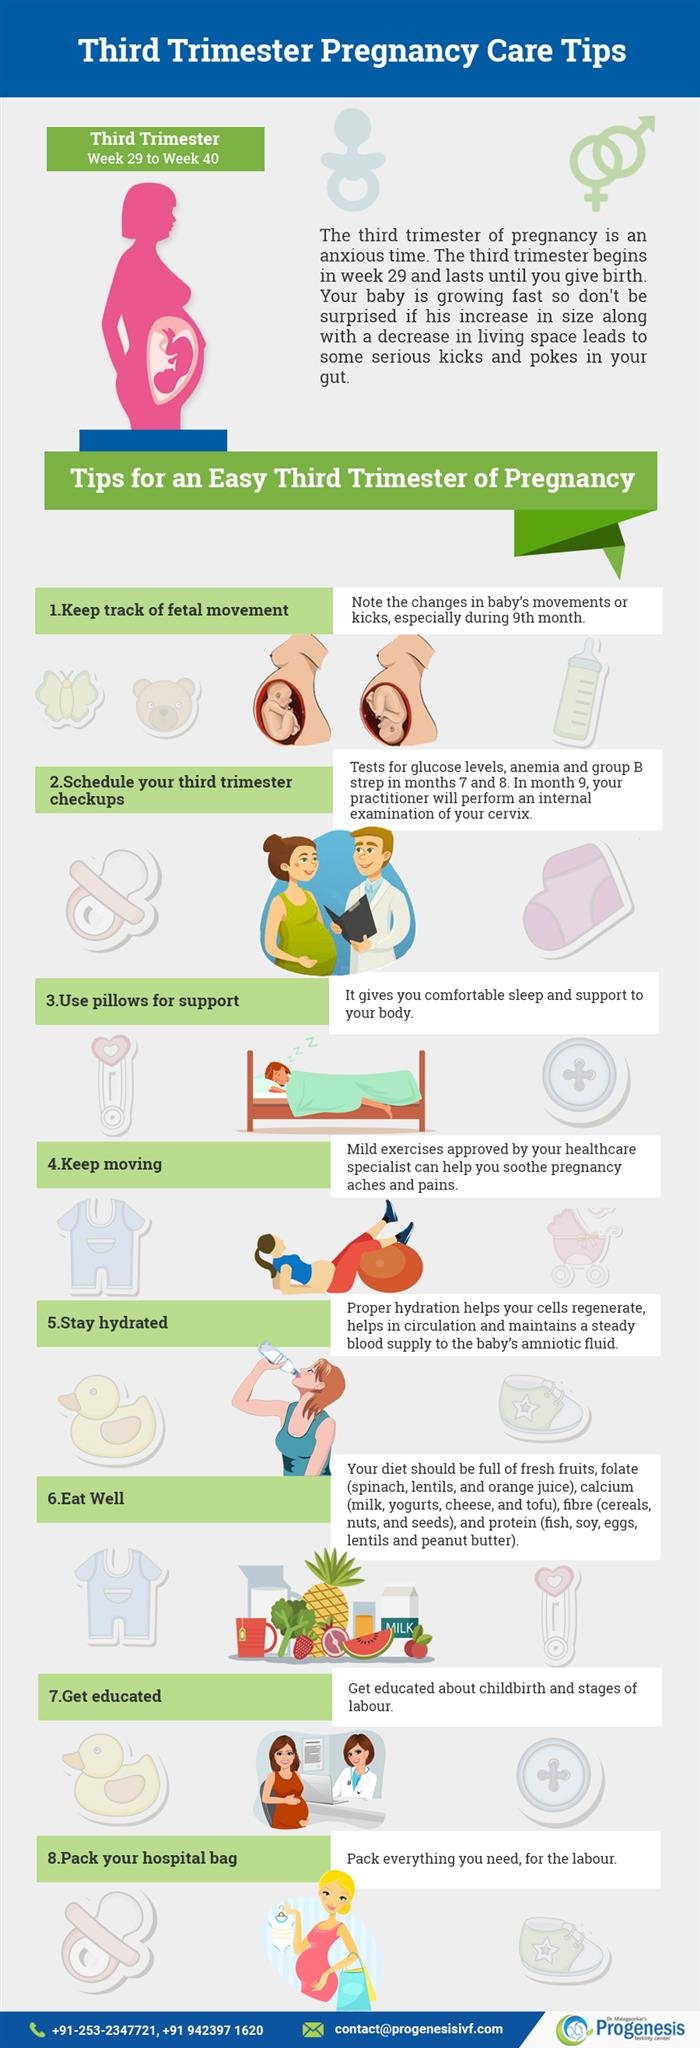 Third Trimester Pregnancy Care Tips